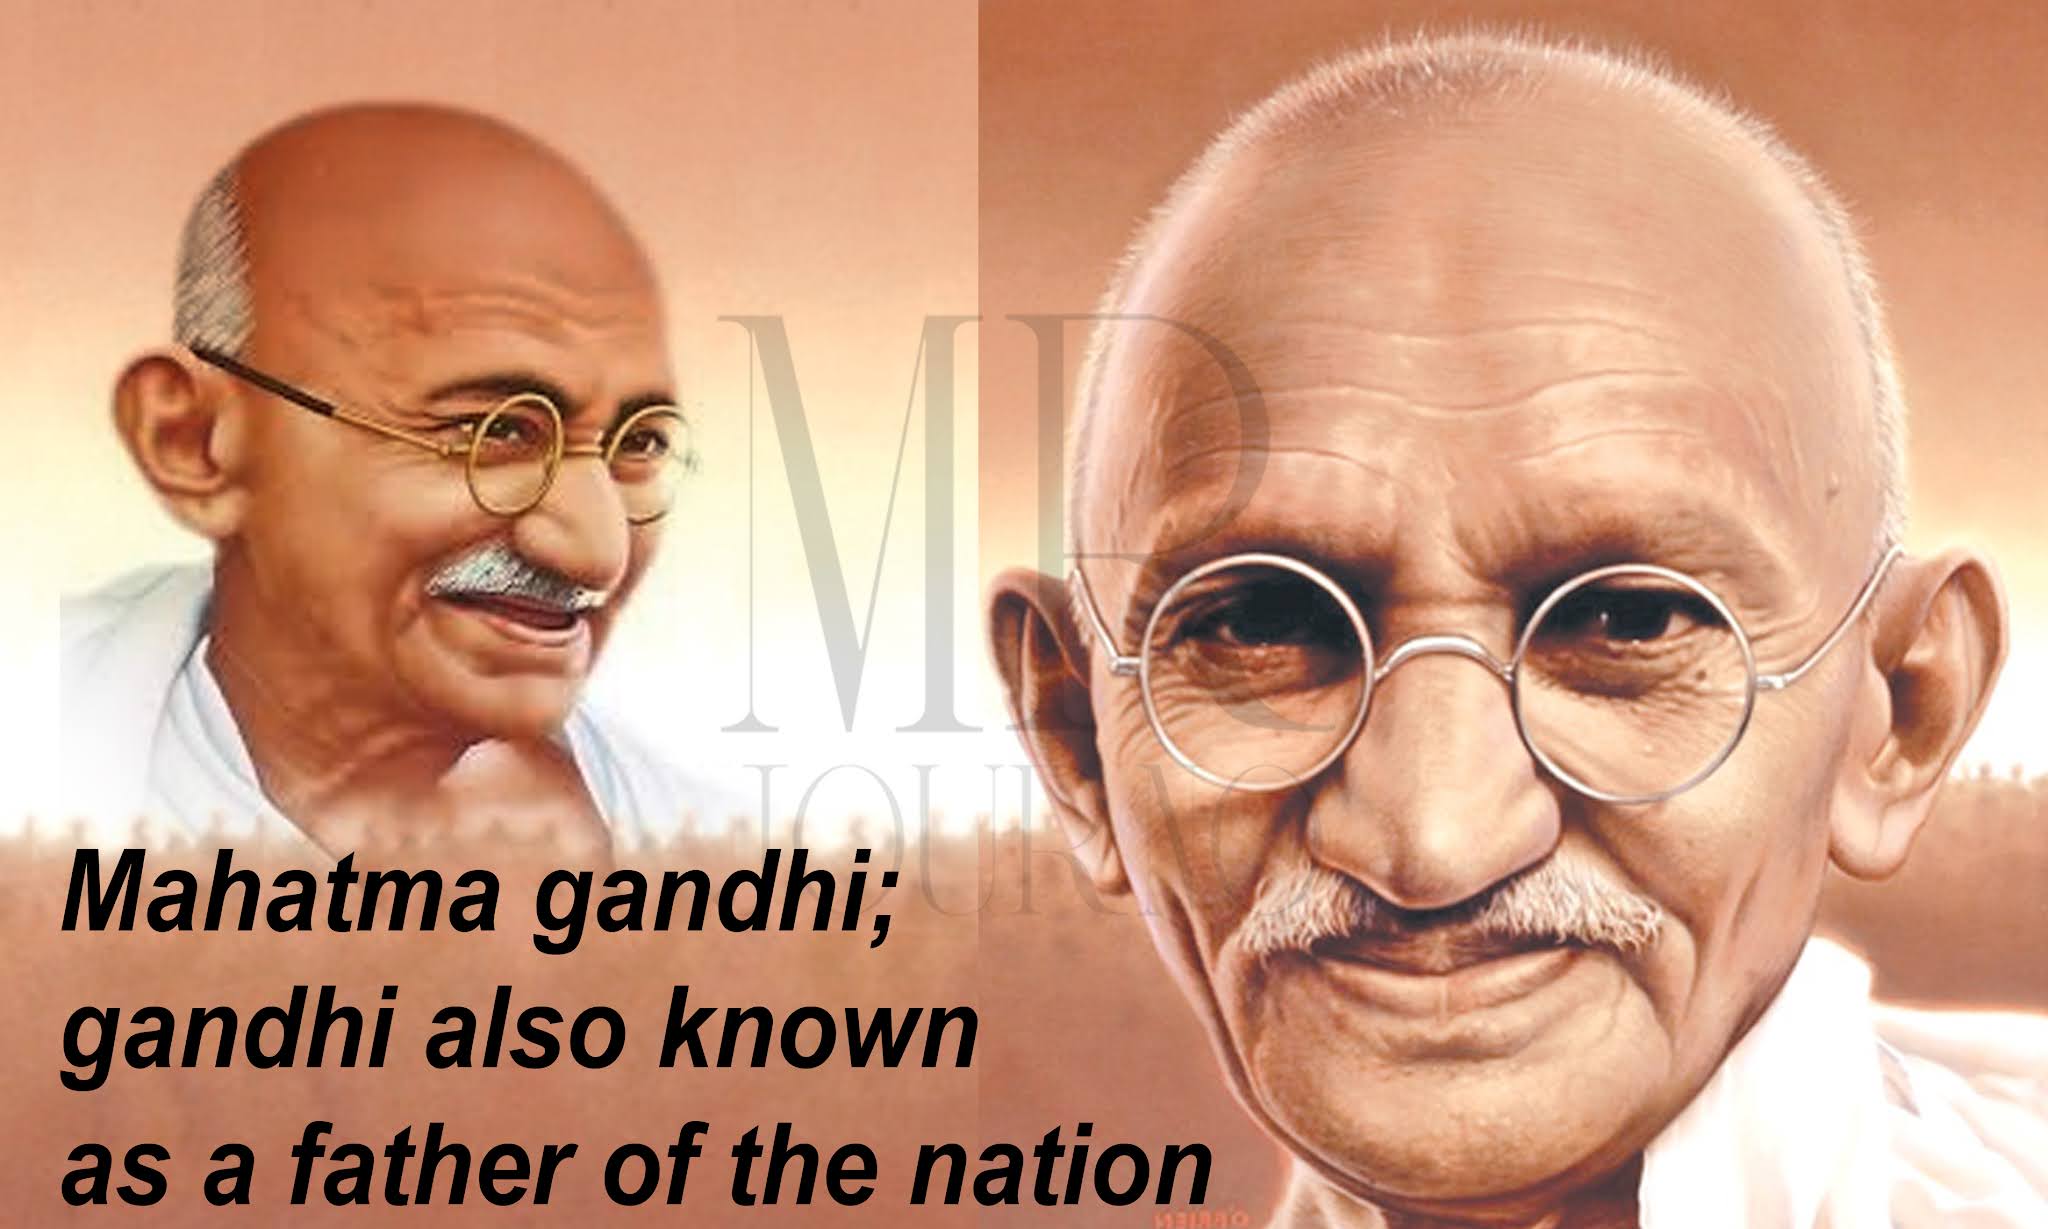 Mahatma Gandhi - Gandhi Also Known as a Father of the Nation 